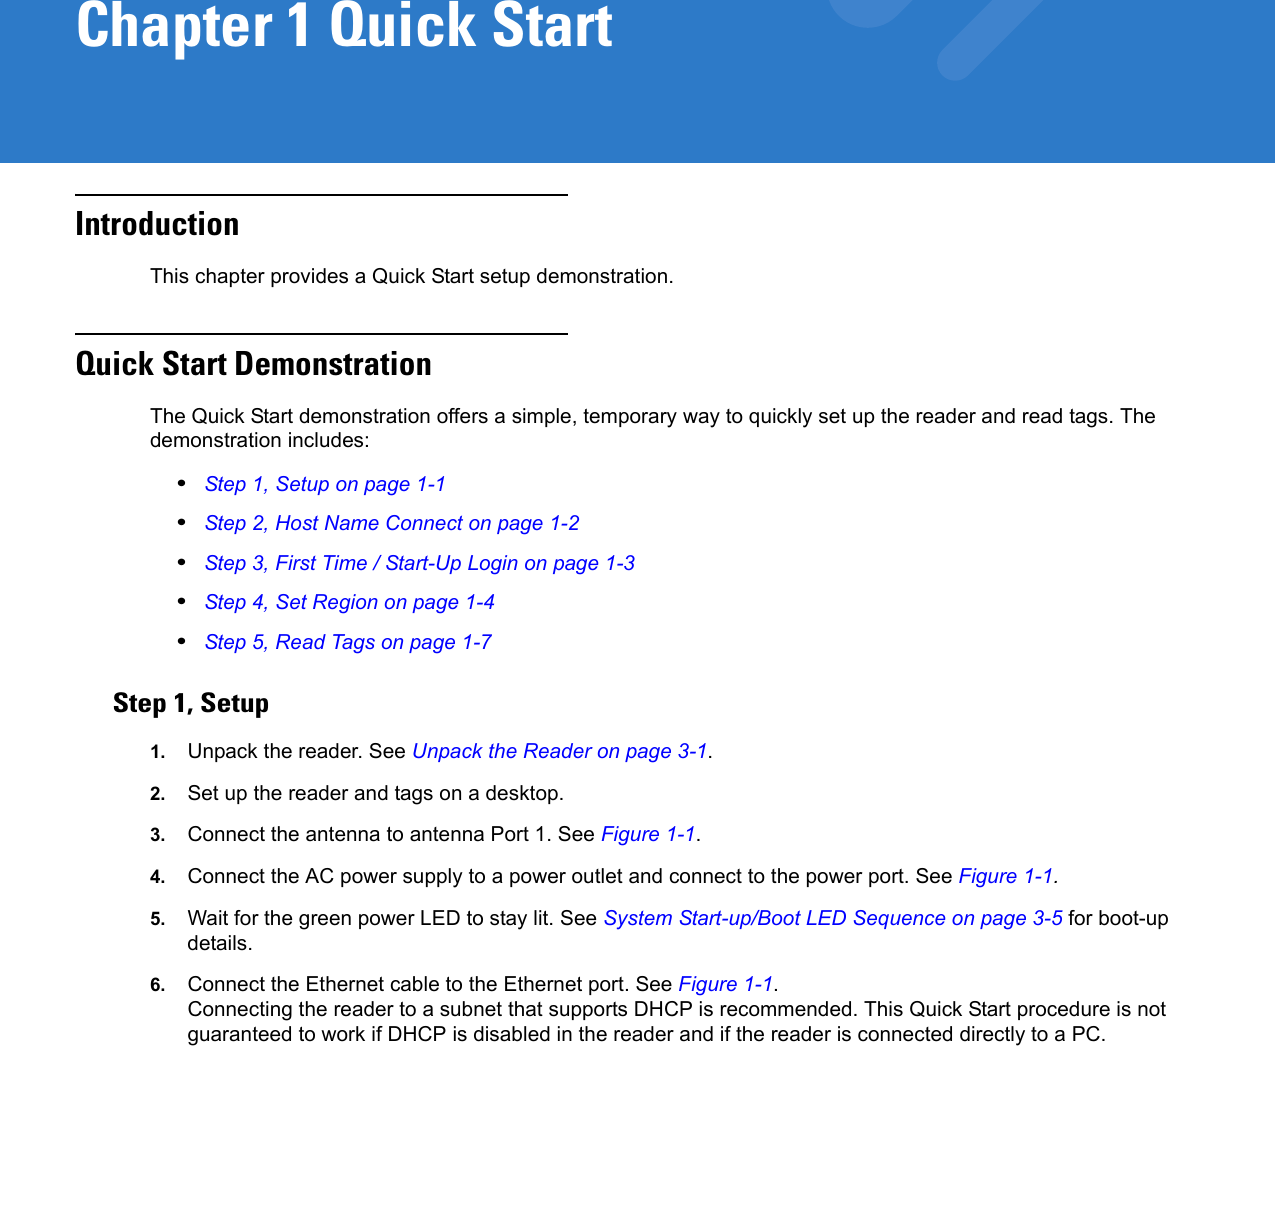 Chapter 1 Quick StartIntroductionThis chapter provides a Quick Start setup demonstration. Quick Start DemonstrationThe Quick Start demonstration offers a simple, temporary way to quickly set up the reader and read tags. The demonstration includes:•Step 1, Setup on page 1-1•Step 2, Host Name Connect on page 1-2•Step 3, First Time / Start-Up Login on page 1-3•Step 4, Set Region on page 1-4•Step 5, Read Tags on page 1-7Step 1, Setup1. Unpack the reader. See Unpack the Reader on page 3-1.2. Set up the reader and tags on a desktop. 3. Connect the antenna to antenna Port 1. See Figure 1-1.4. Connect the AC power supply to a power outlet and connect to the power port. See Figure 1-1. 5. Wait for the green power LED to stay lit. See System Start-up/Boot LED Sequence on page 3-5 for boot-up details.6. Connect the Ethernet cable to the Ethernet port. See Figure 1-1.Connecting the reader to a subnet that supports DHCP is recommended. This Quick Start procedure is not guaranteed to work if DHCP is disabled in the reader and if the reader is connected directly to a PC.